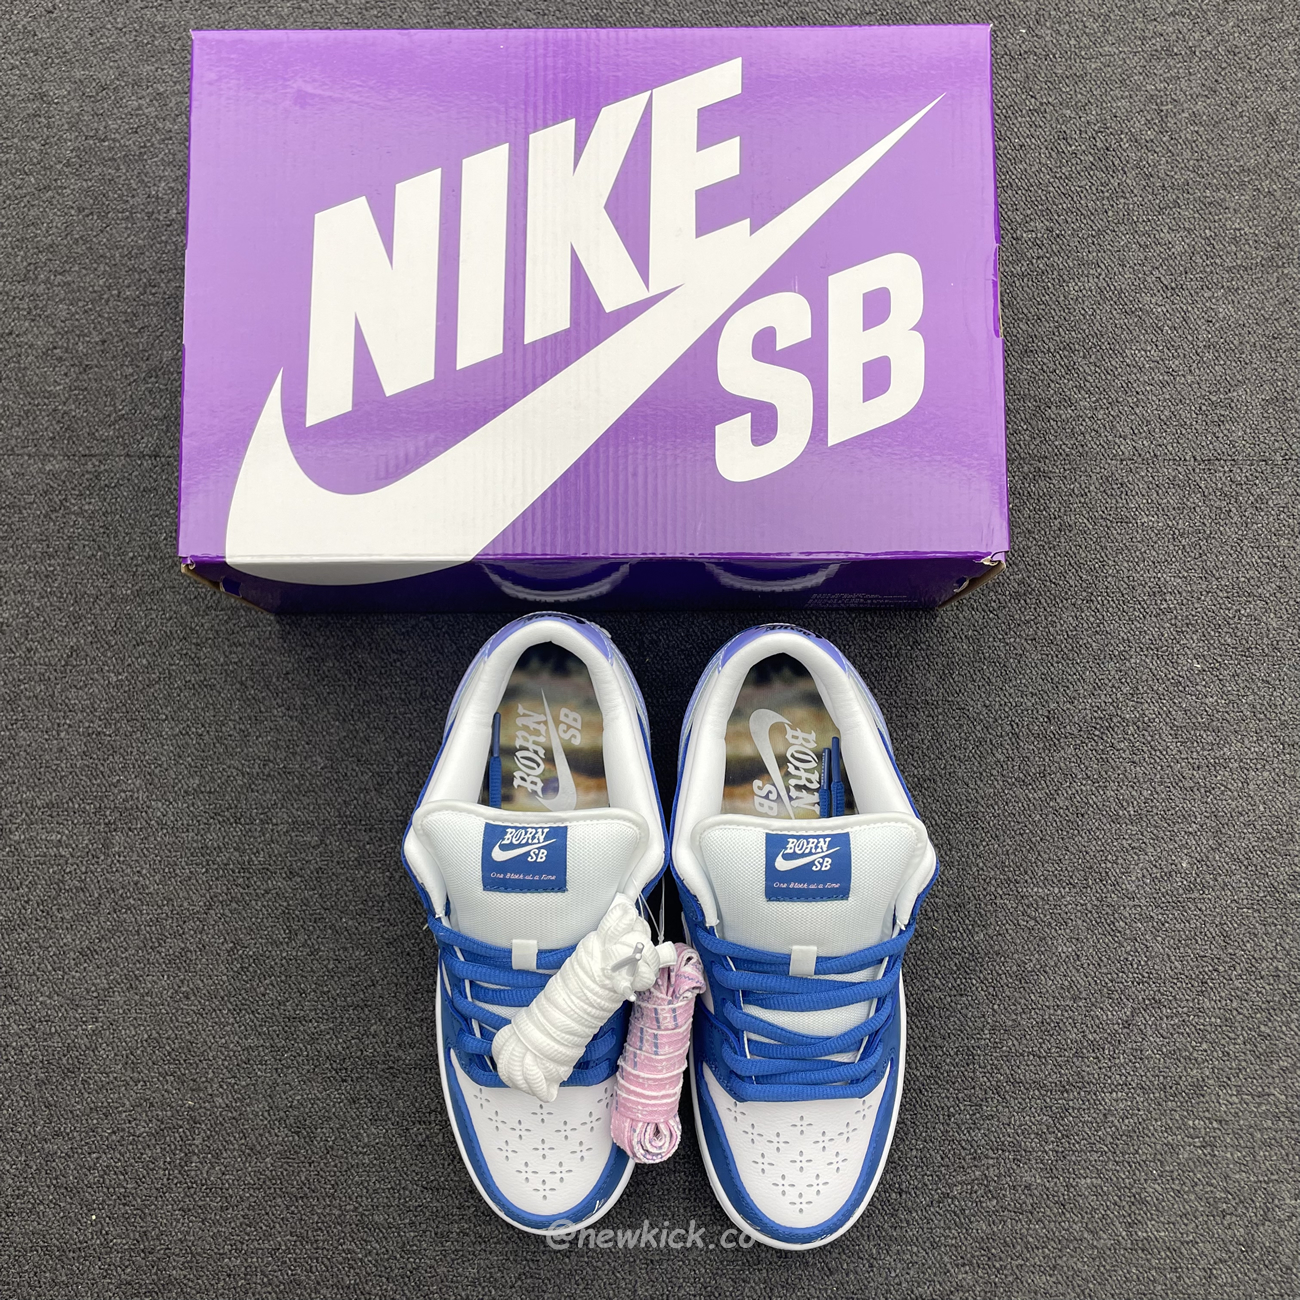 Nike Sb Dunk Low Born X Raised One Block At A Time Fn7819 400 (16) - newkick.org